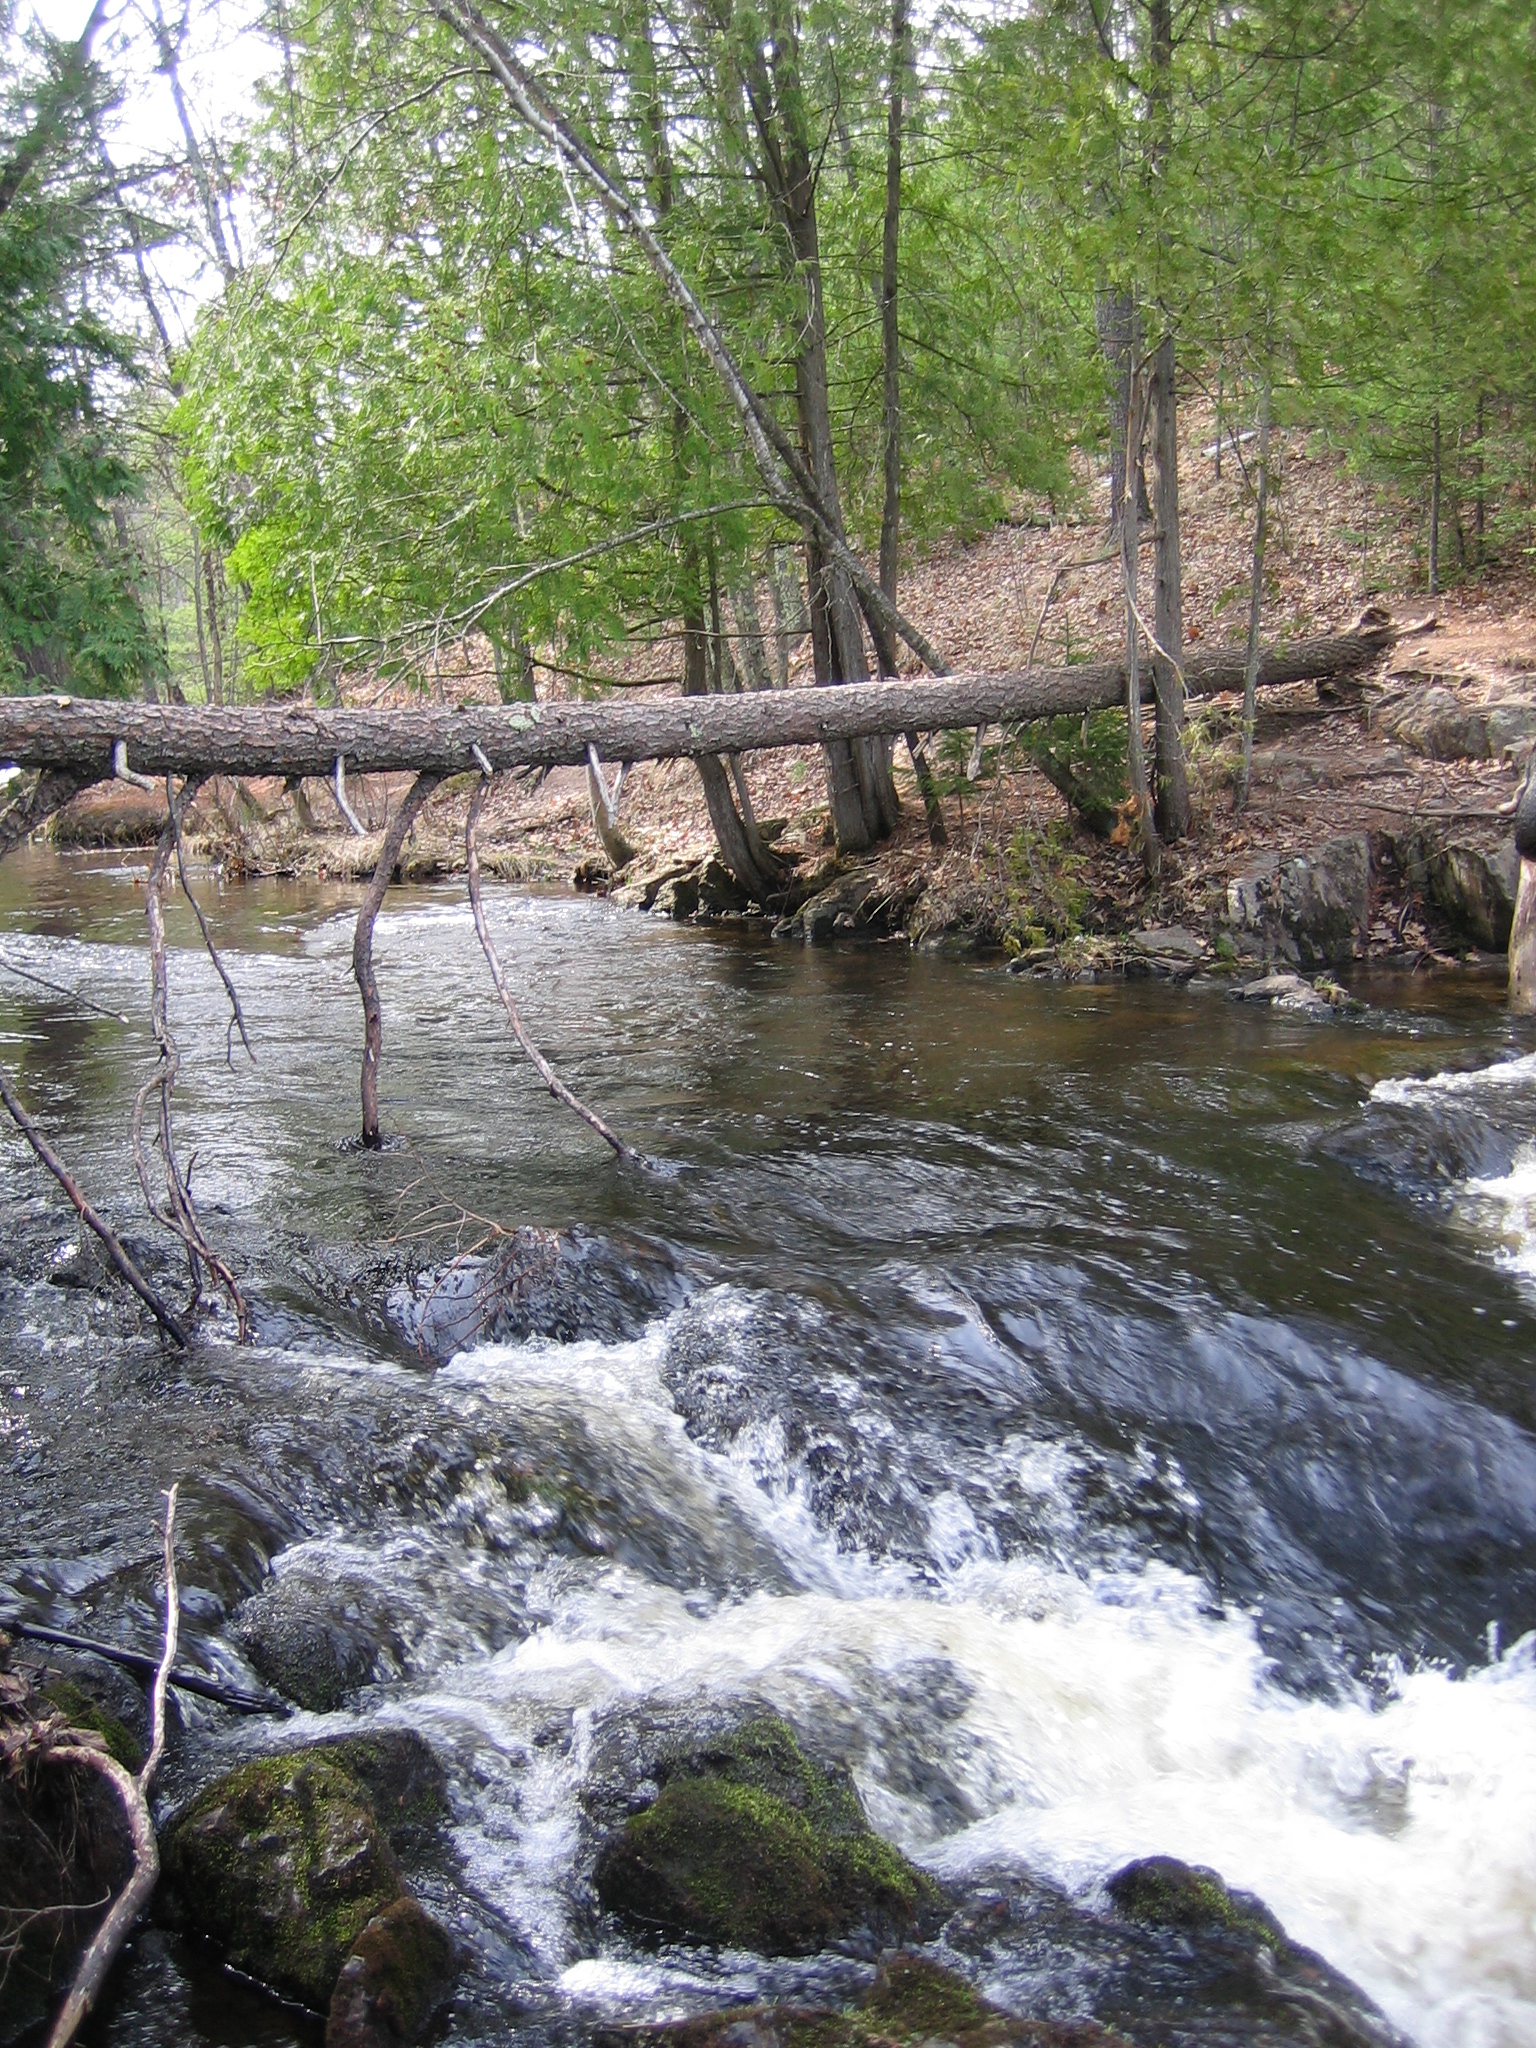 river flowing through a wooded forest with fallen trees